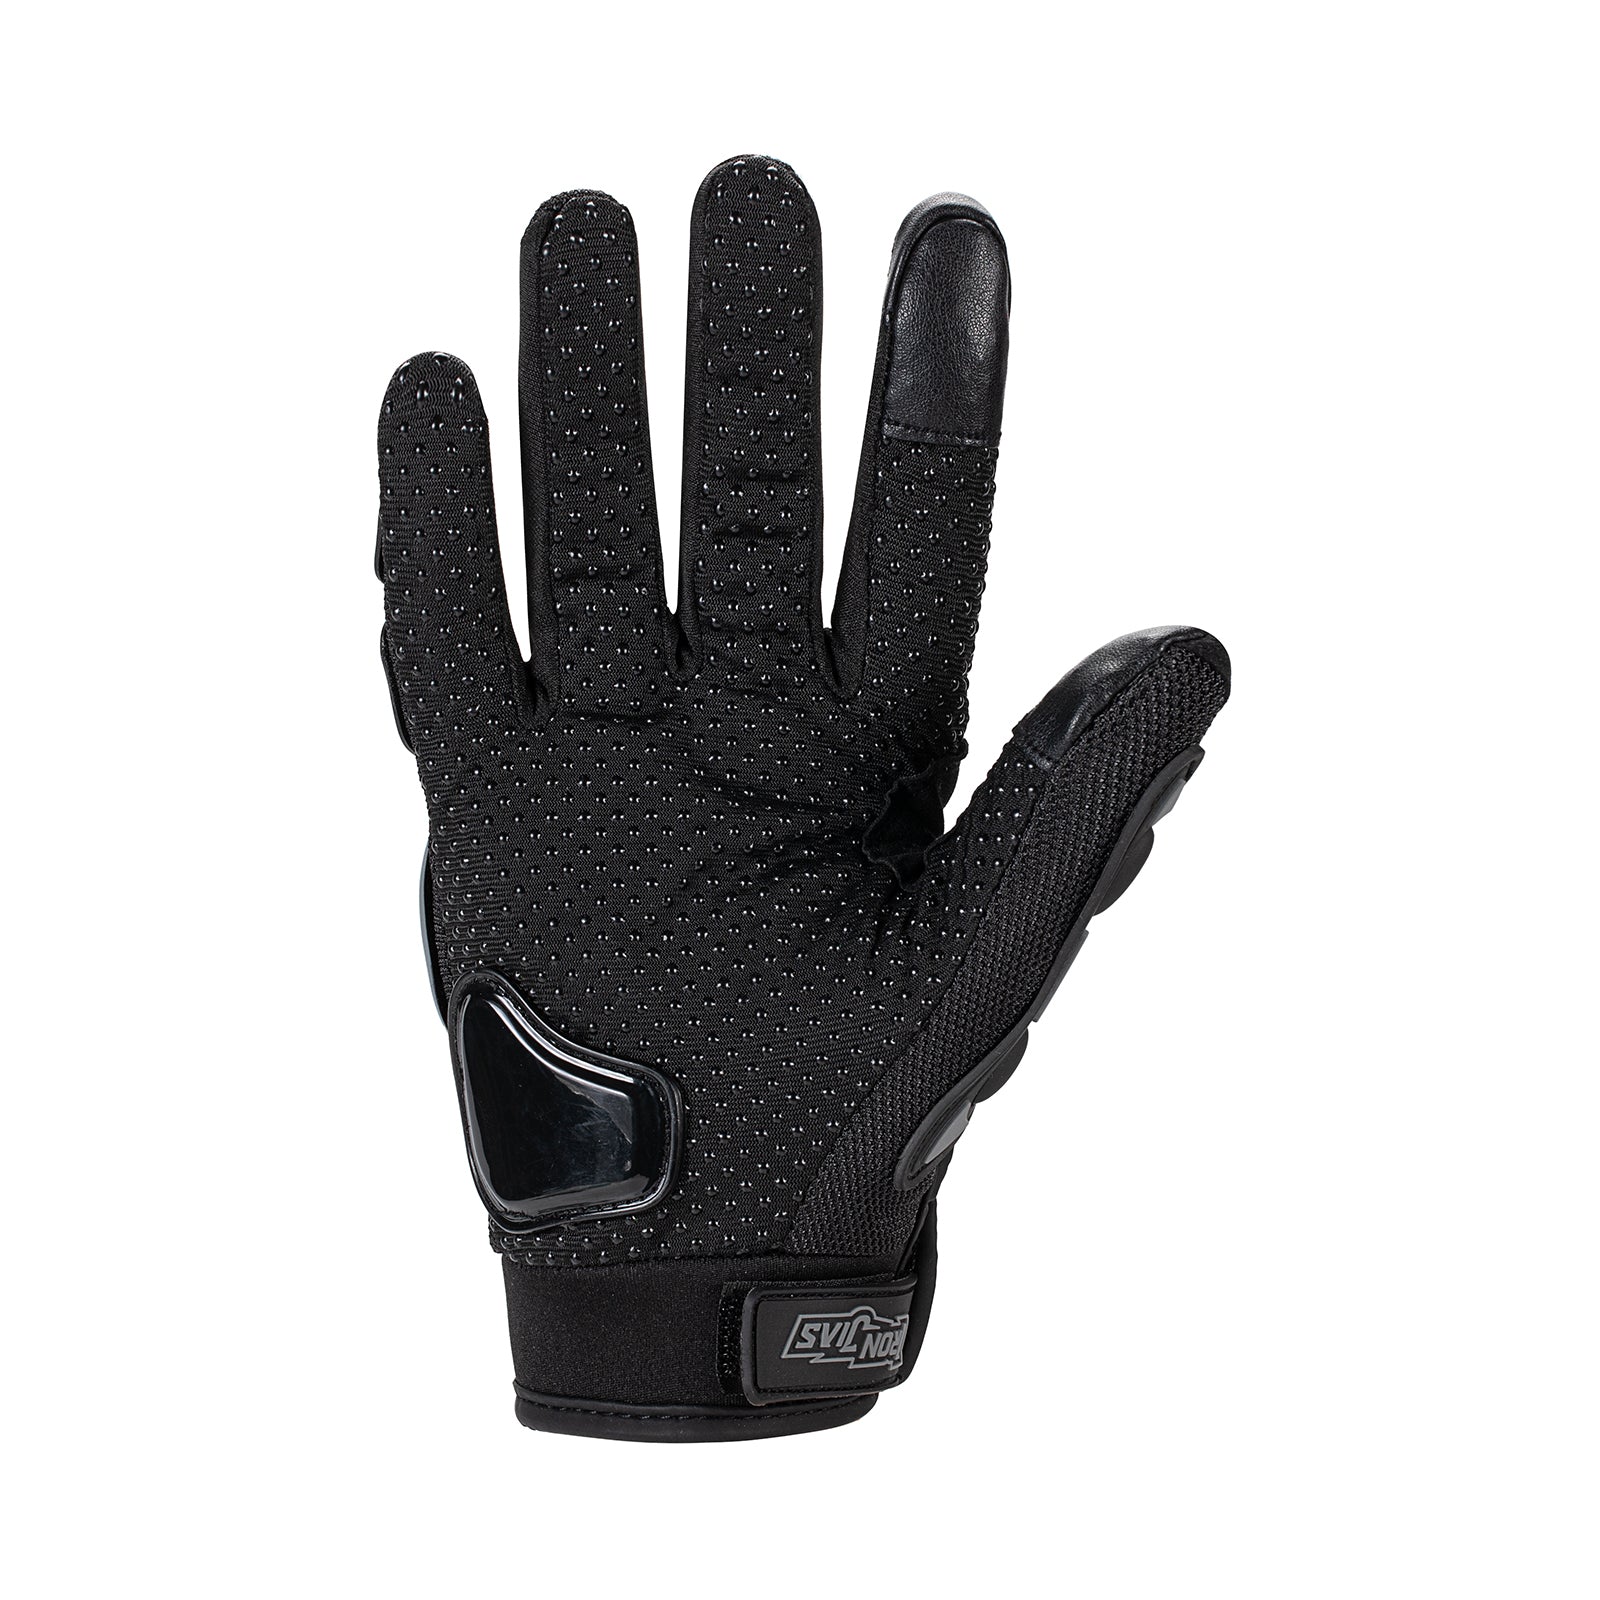 IRONJIAS Summer Mesh Breathable Motorcycle Protective Gloves